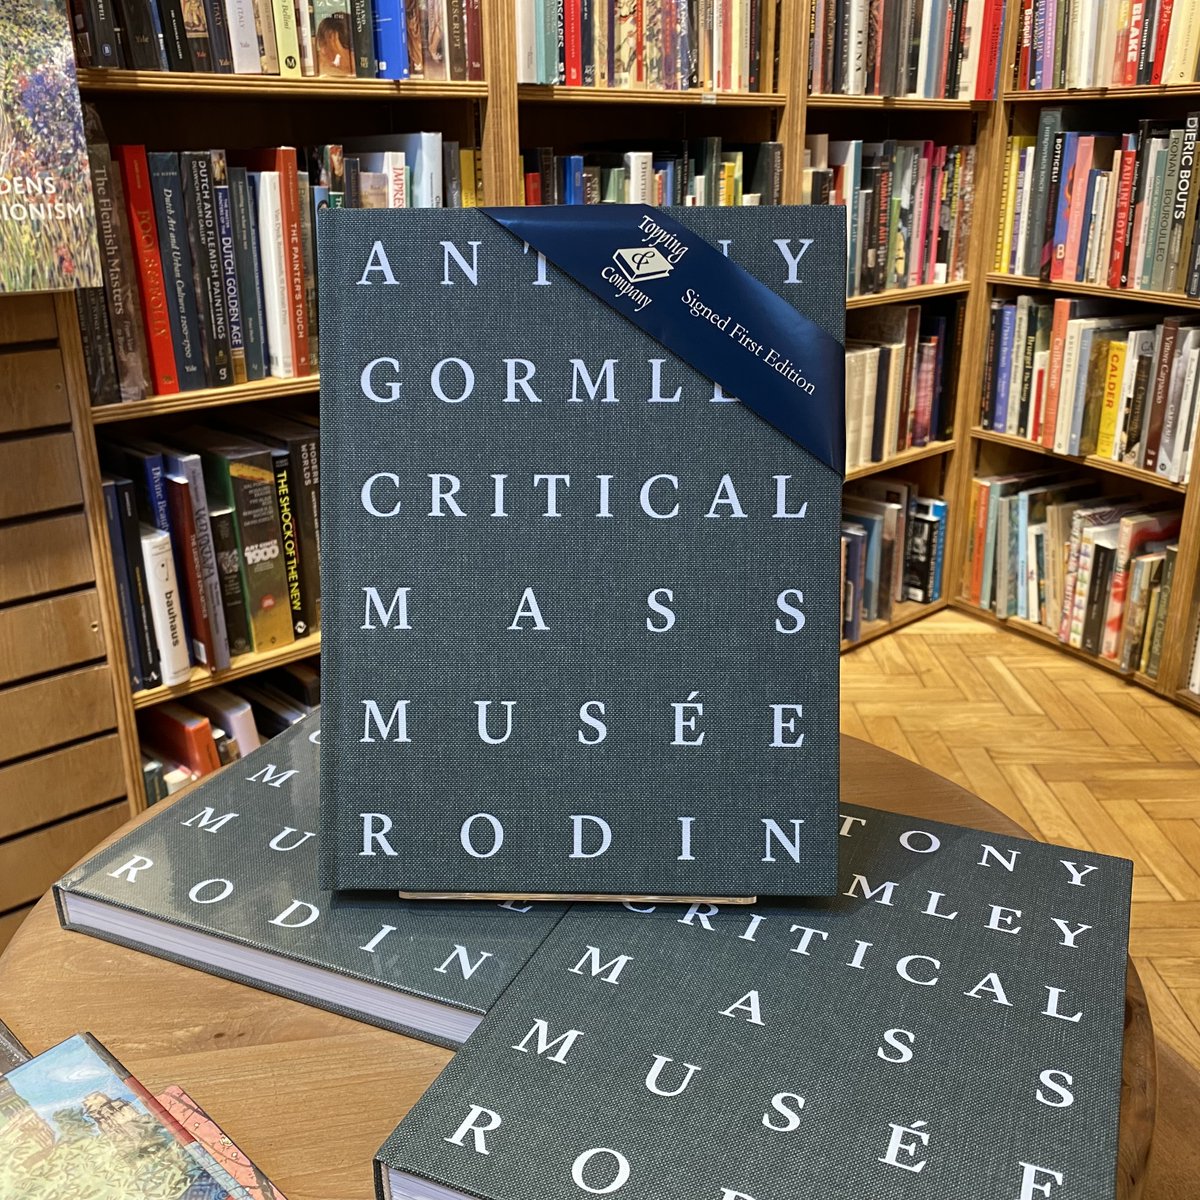 🏛 Bookseller Recommendation 🌿 Sculpture, gardens, Parisian museums - what's not to love? Our resident art expert, Robin, has even managed to get his hands on a limited number of copies of Antony Gormley's 'Critical Mass' signed by the artist himself! toppingbooks.co.uk/books/sophie-b…